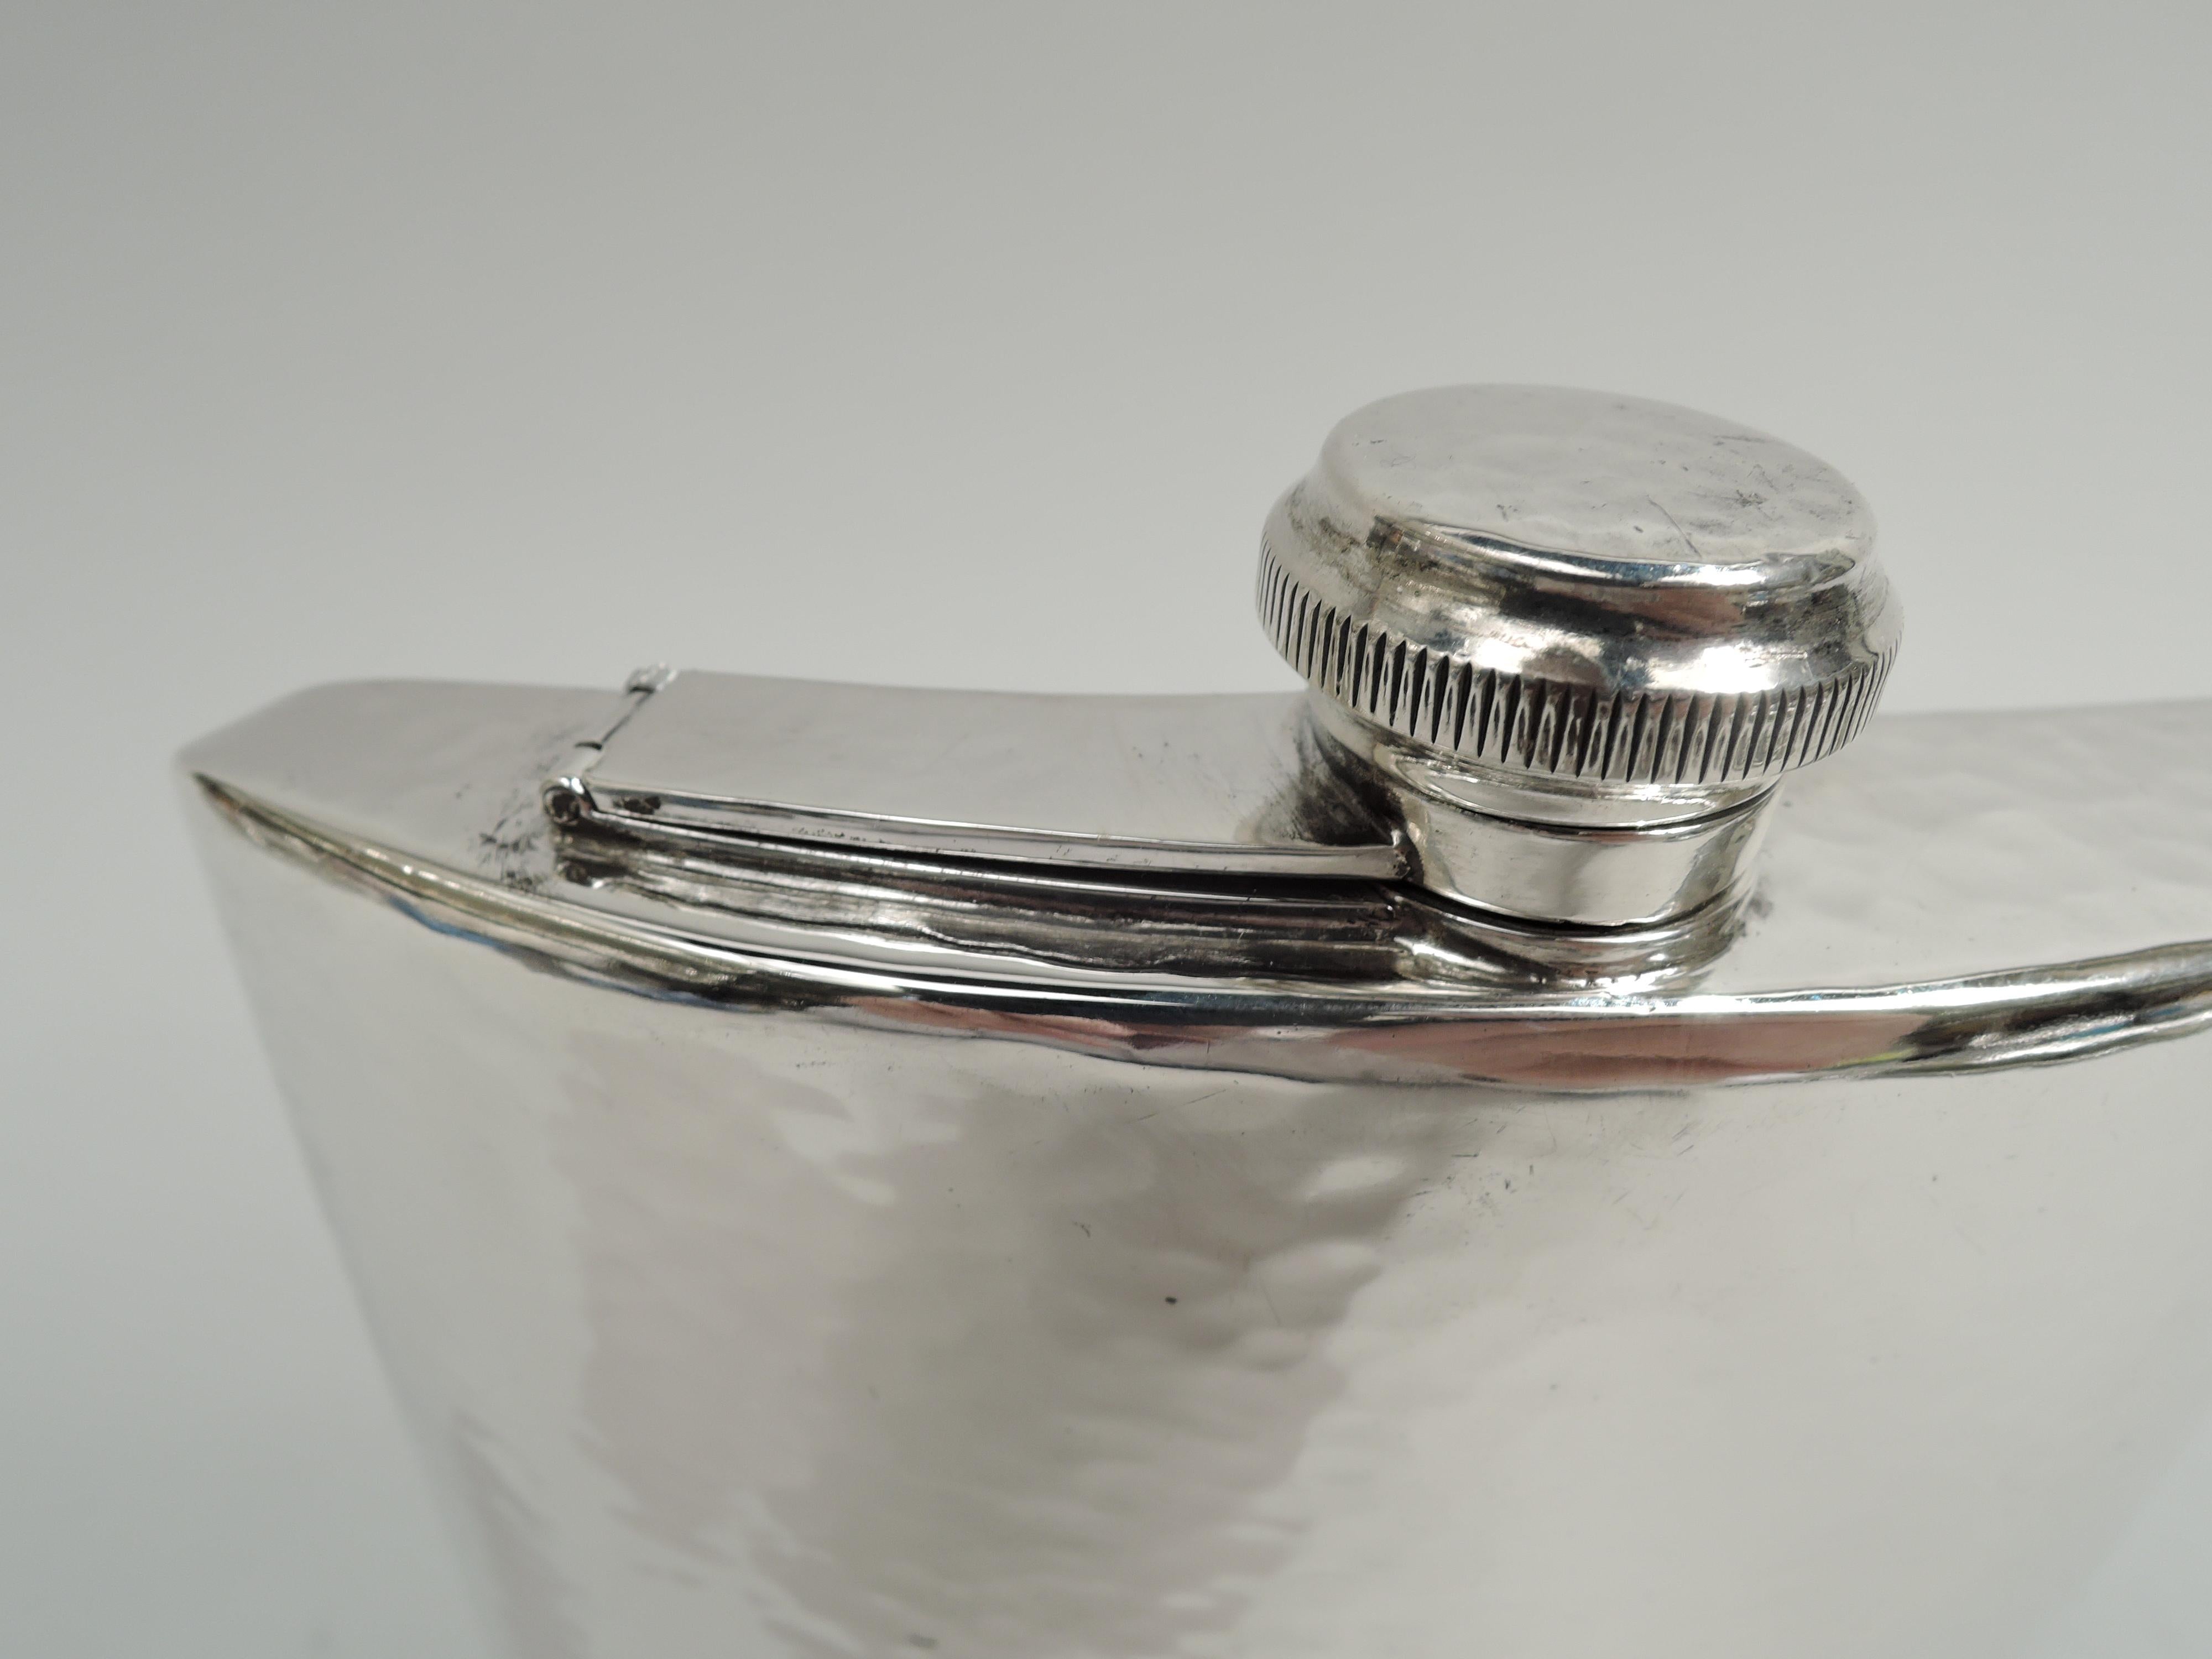 American Chicago Craftsman Hand-Hammered Sterling Silver Flask by Lebolt